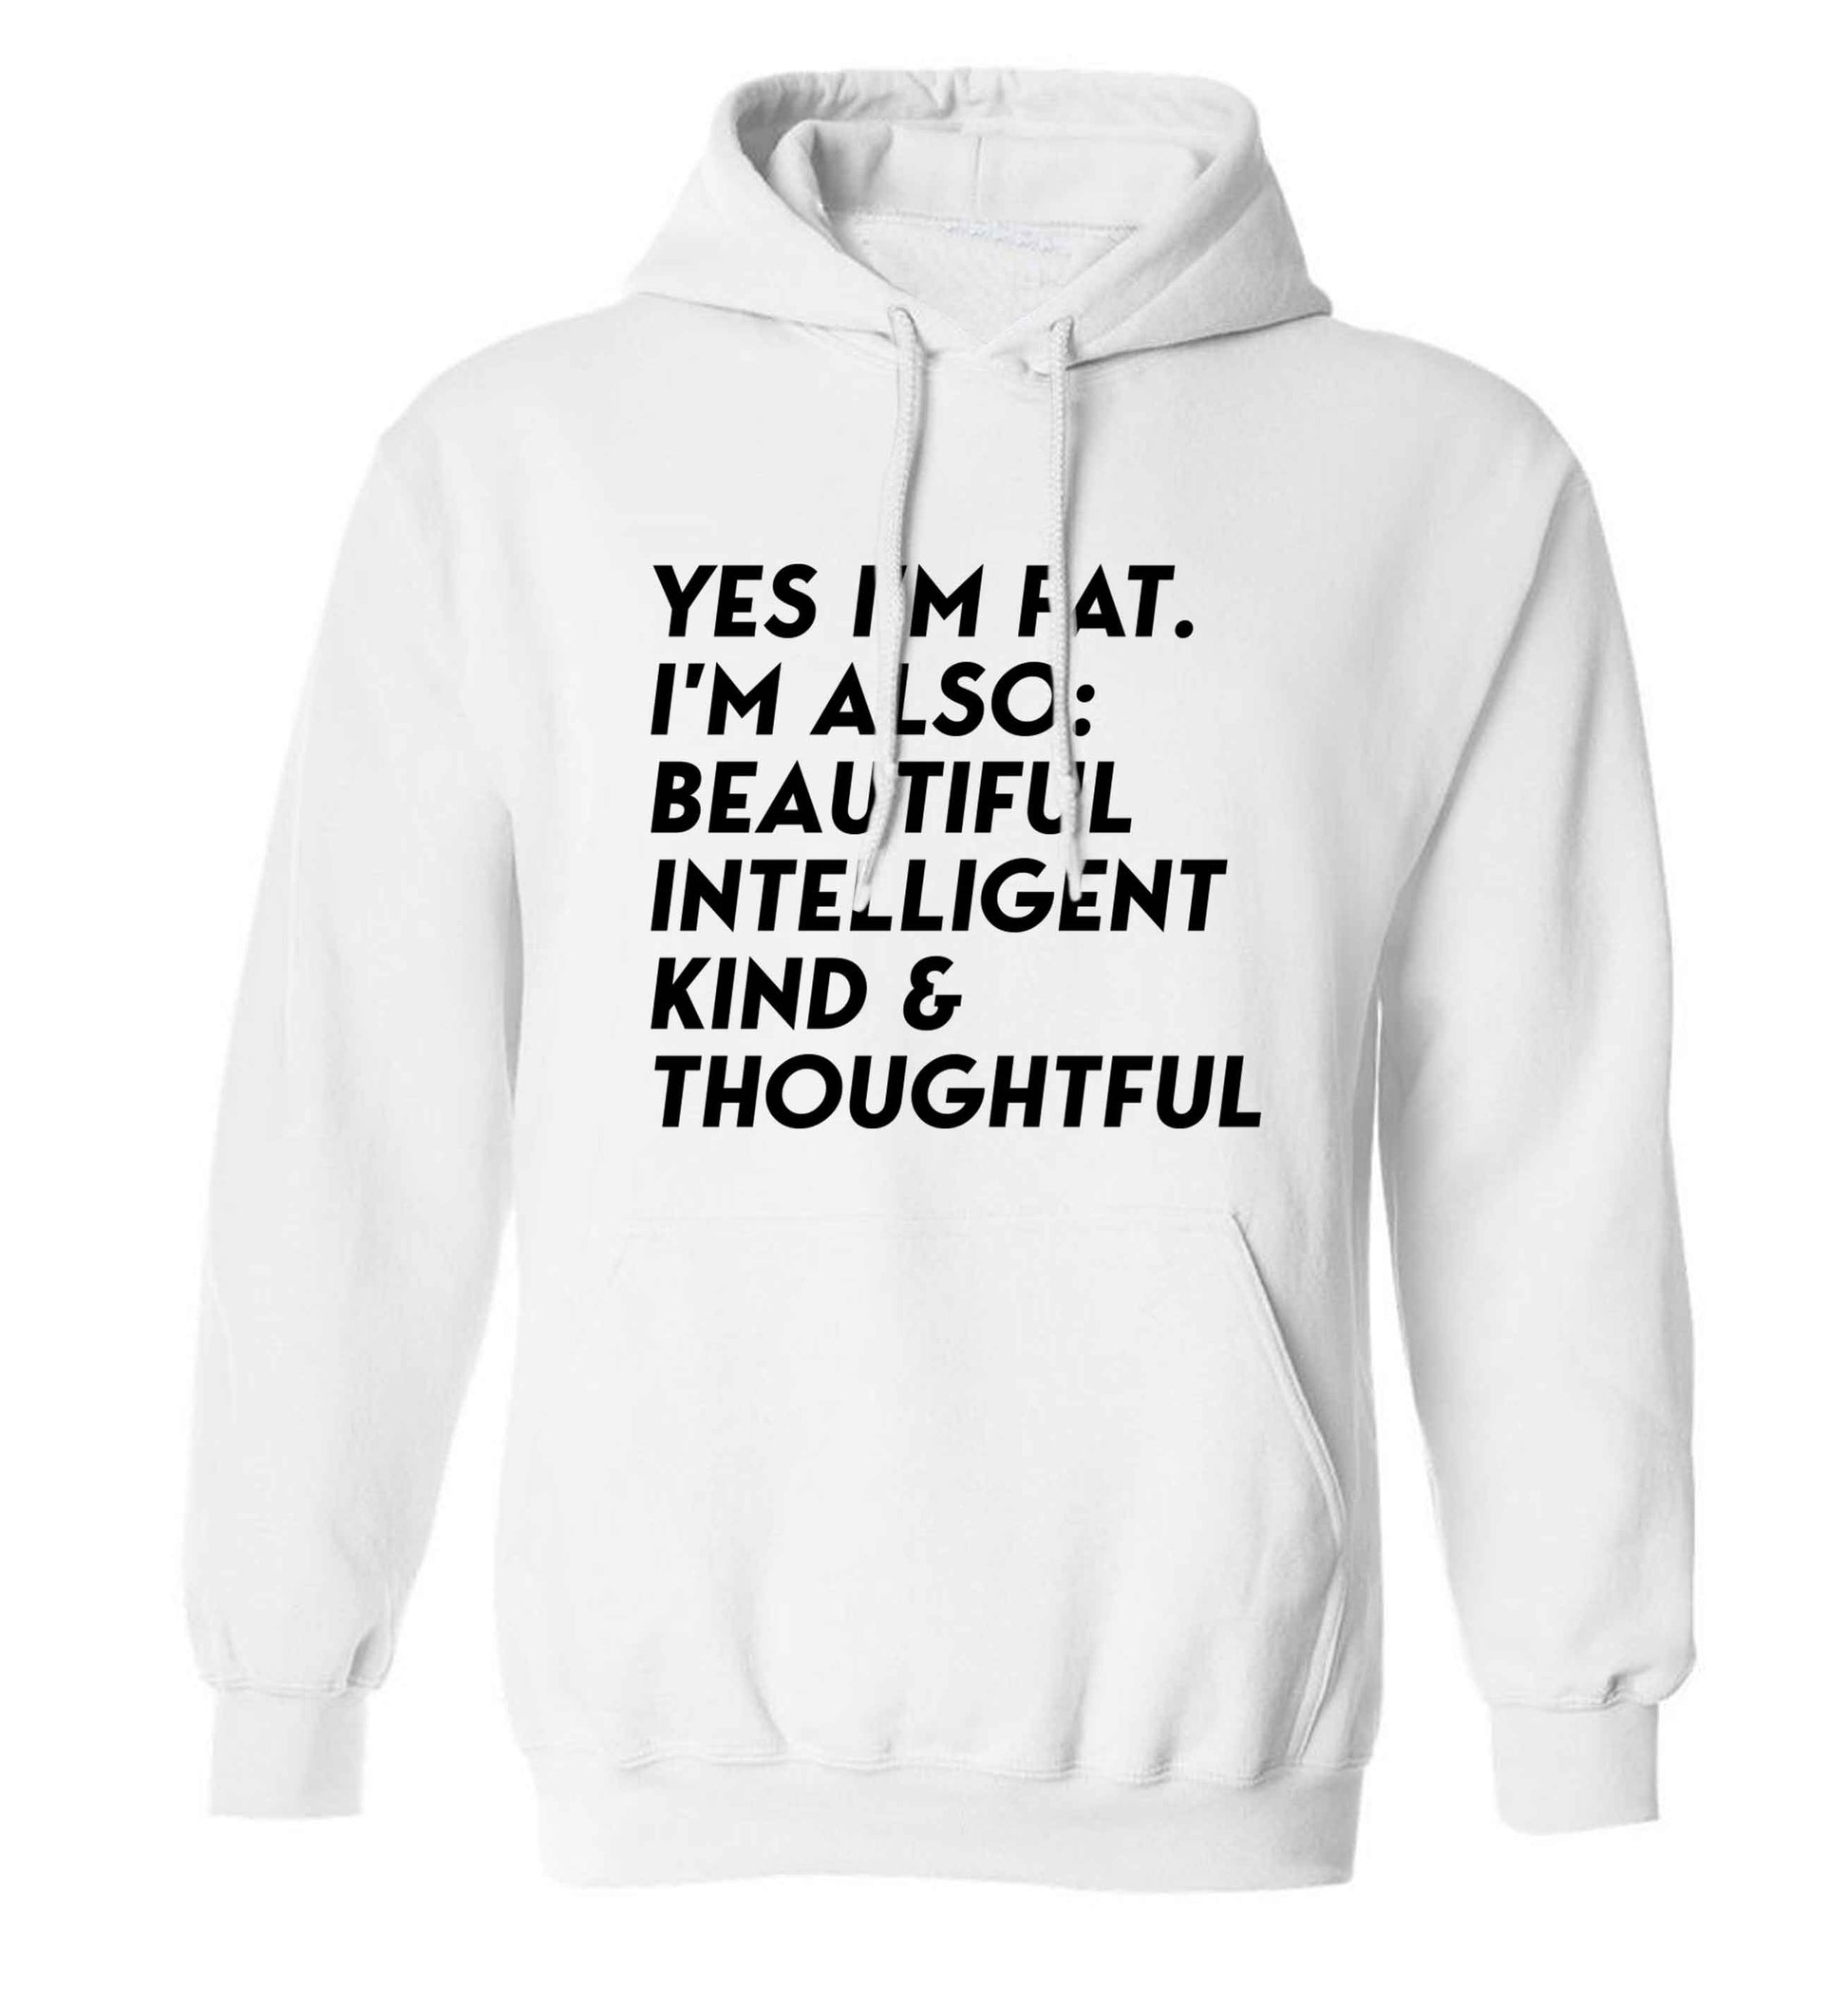 Yes I'm fat. I'm also: Beautiful intelligent kind and thoughtful adults unisex white hoodie 2XL